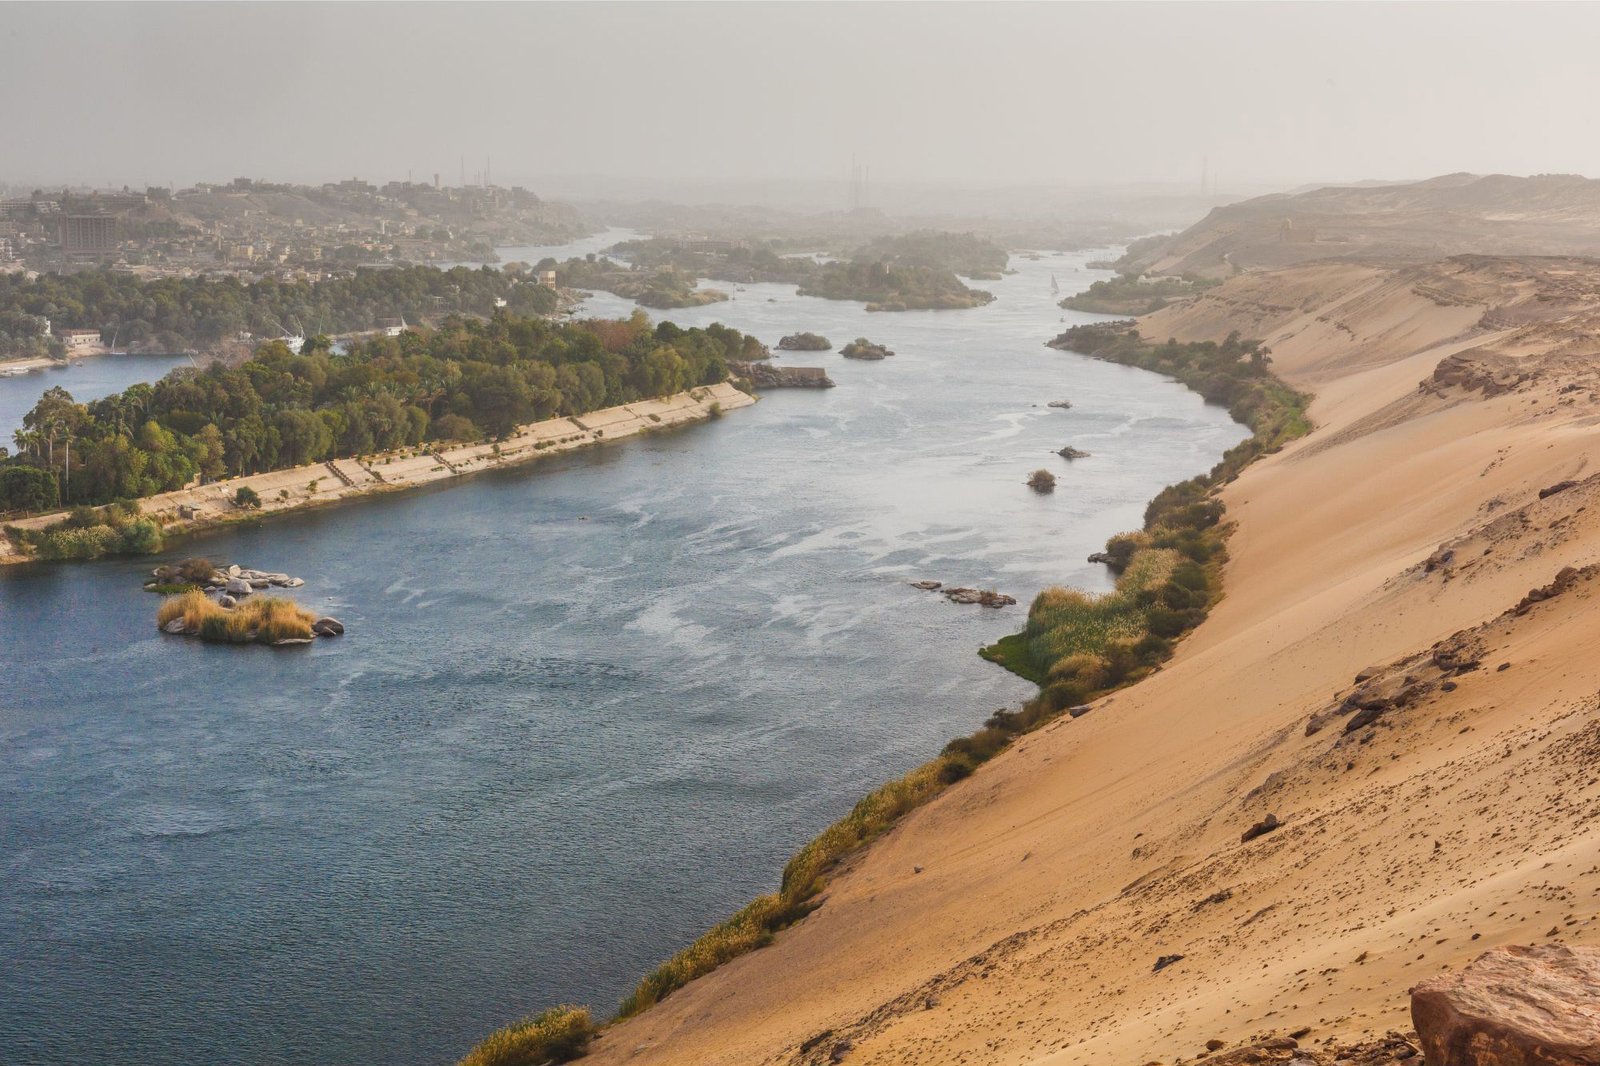 Unraveling Secrets of Ancient Egypt – Groundbreaking Study Rewrites the Nile’s History